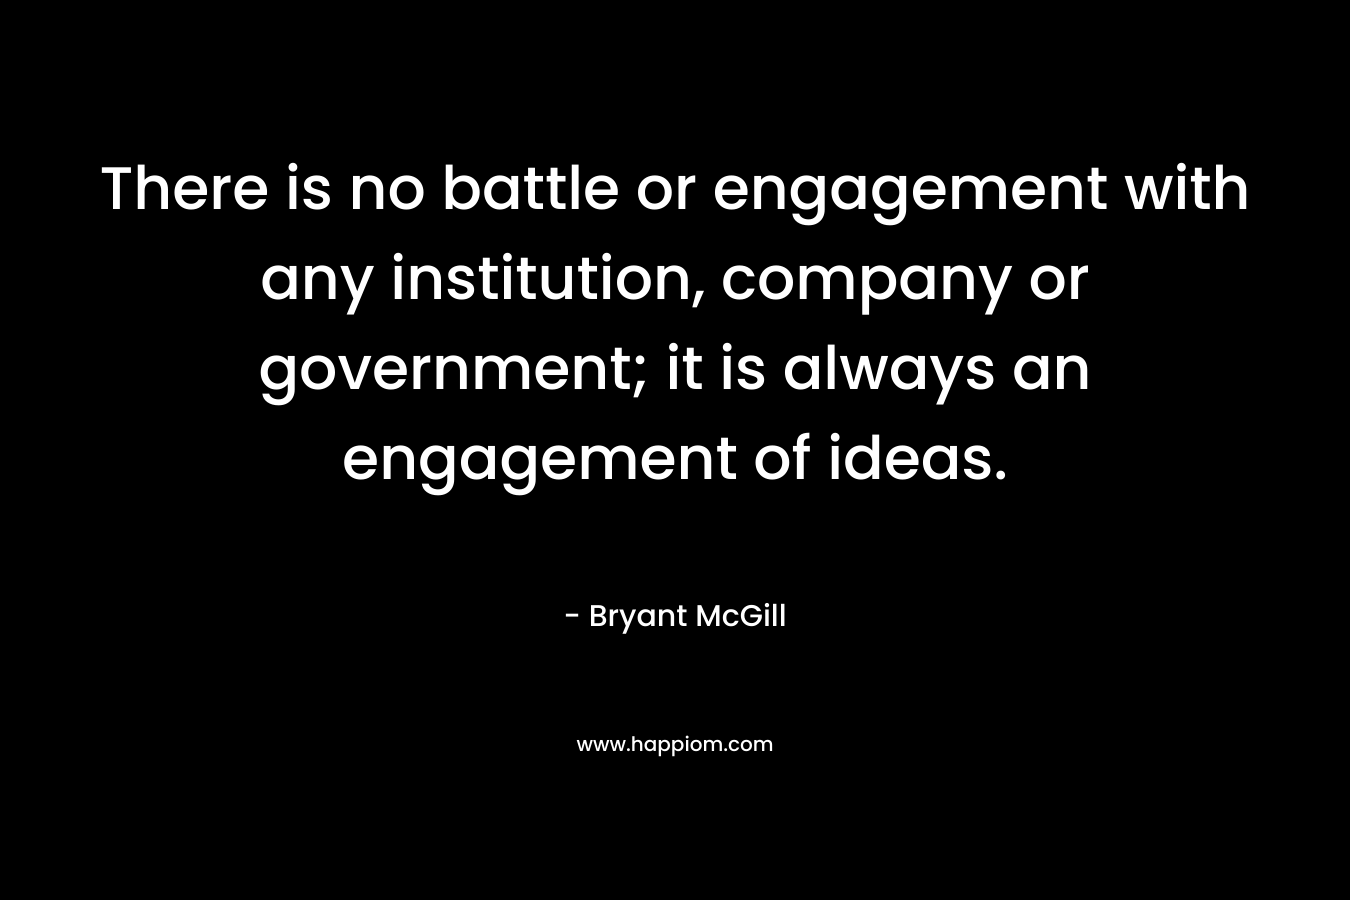 There is no battle or engagement with any institution, company or government; it is always an engagement of ideas.